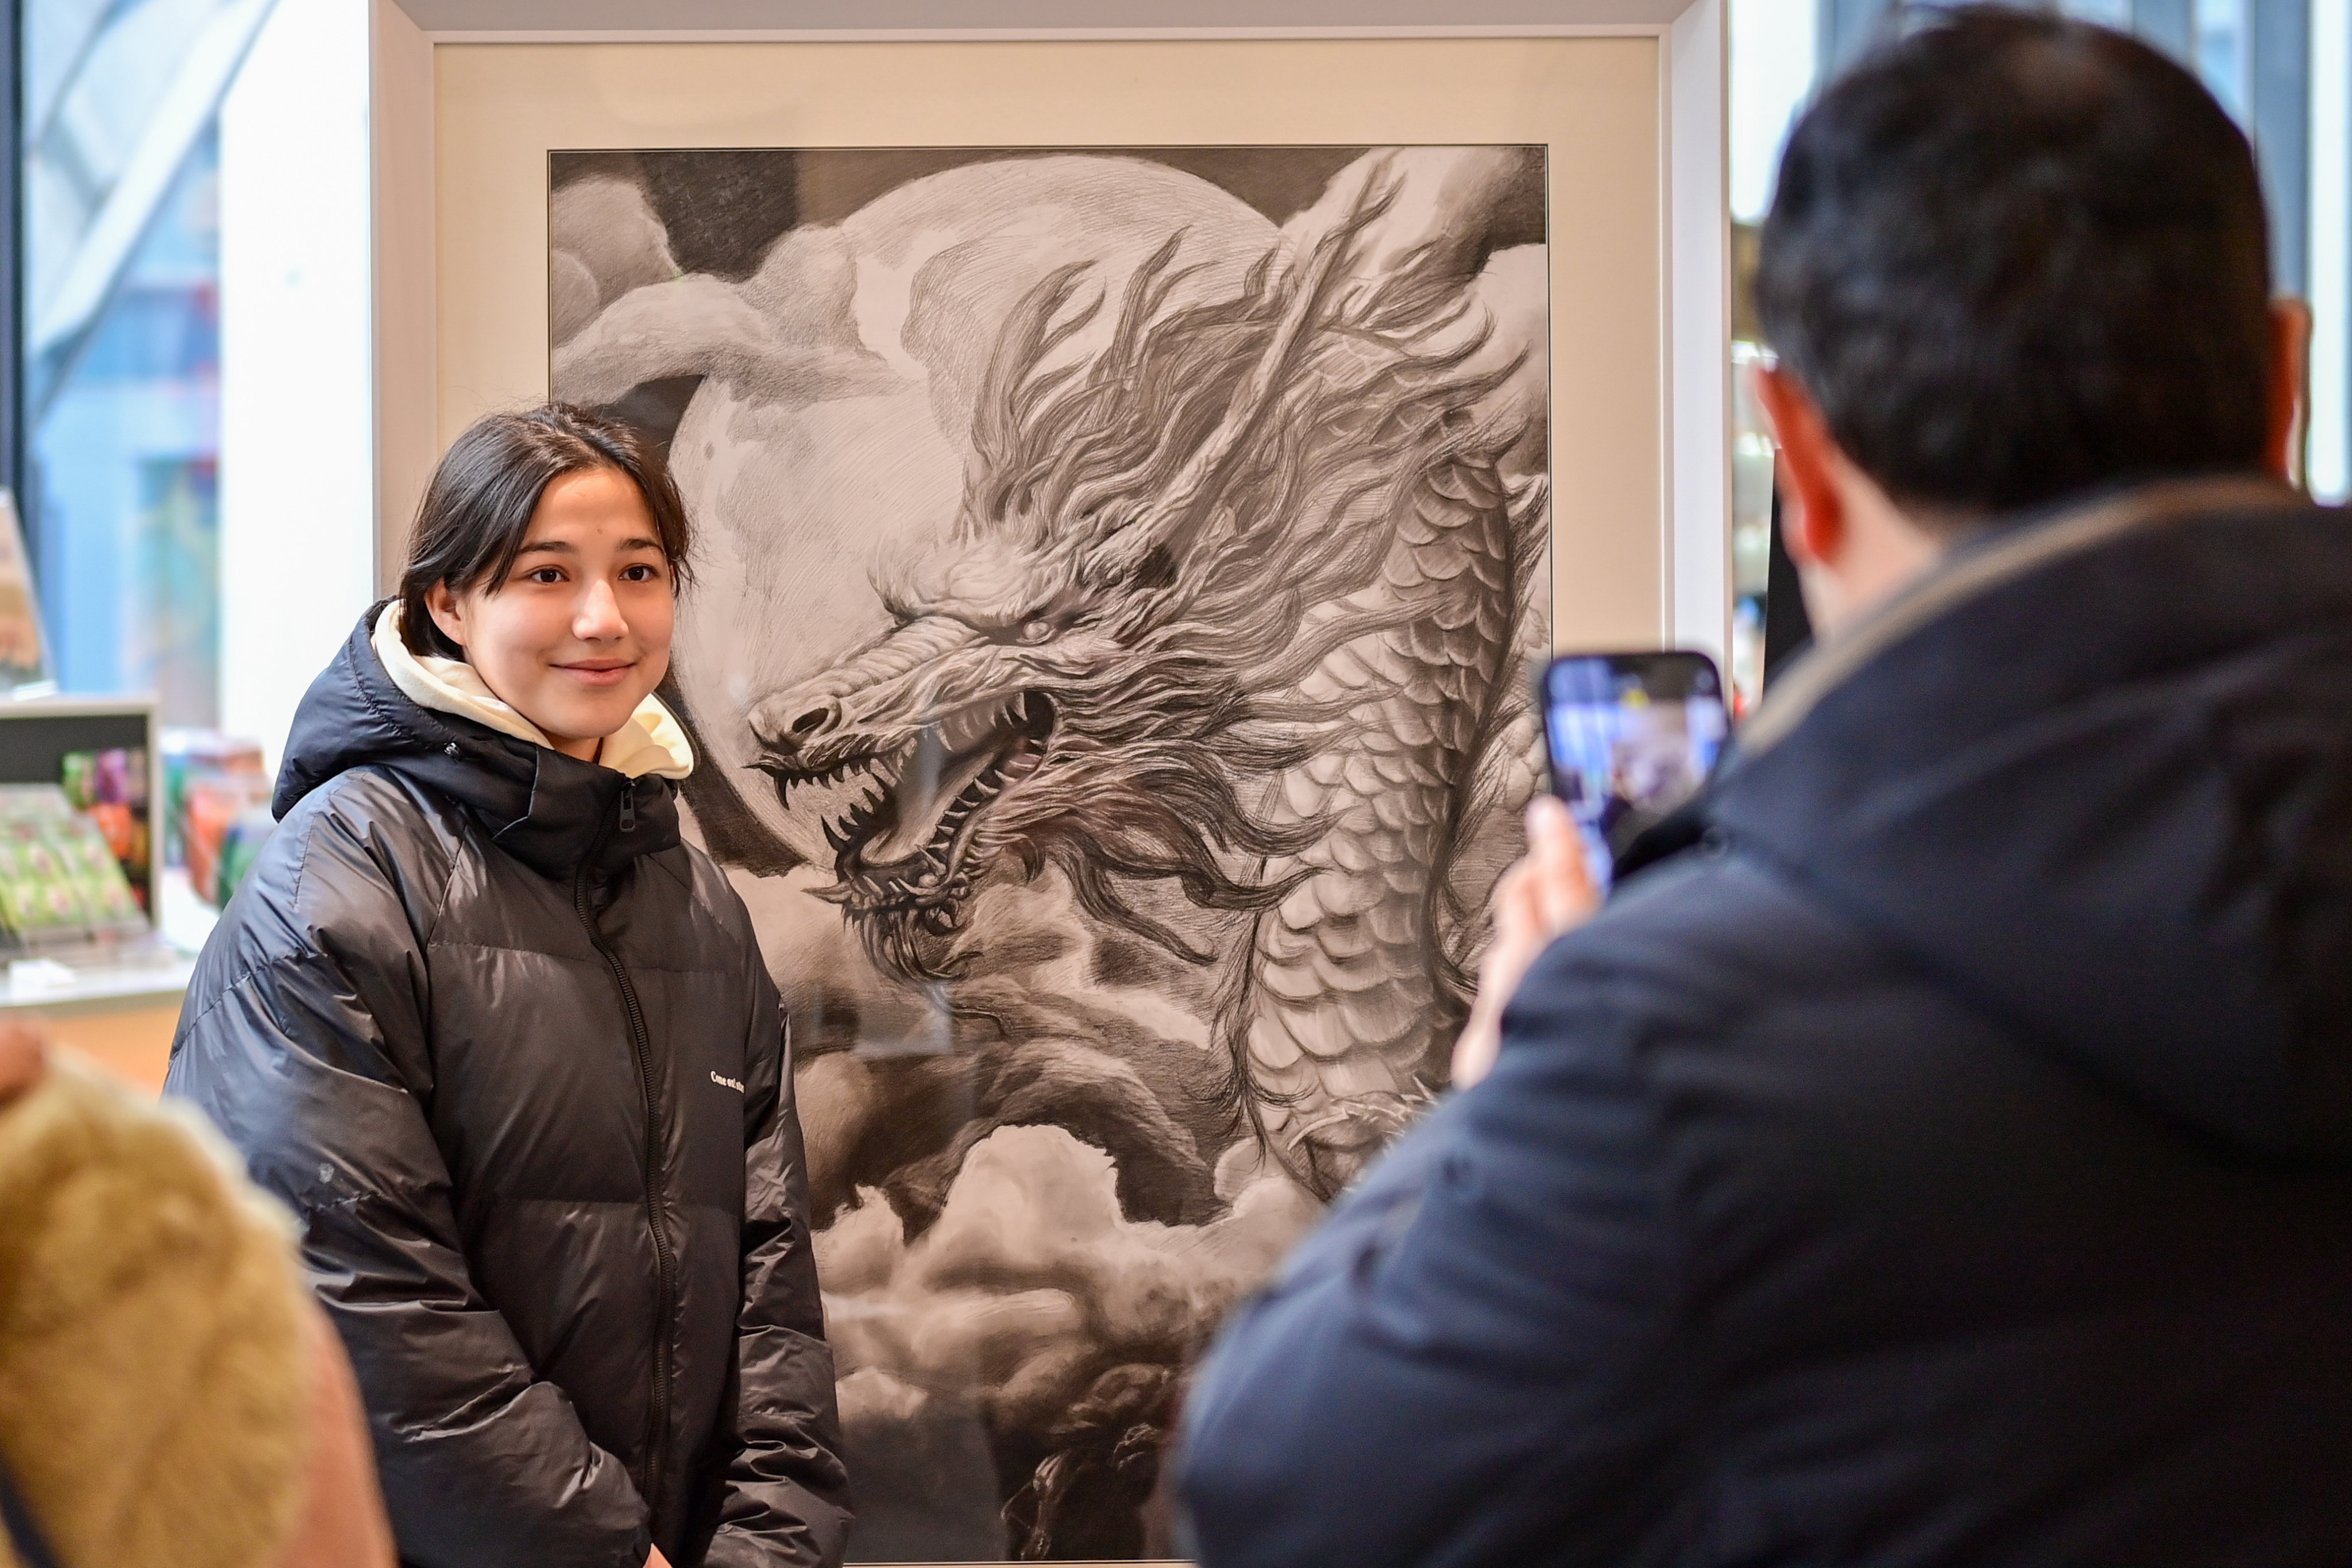 A visitor poses with an exhibit at a museum in Urumqi, capital of the Xinjiang Uygur autonomous region, on February 14. A US panel on China has asked the State Department to raise the risk level of its Xinjiang travel advisory to dissuade tourism there. Photo: Xinhua